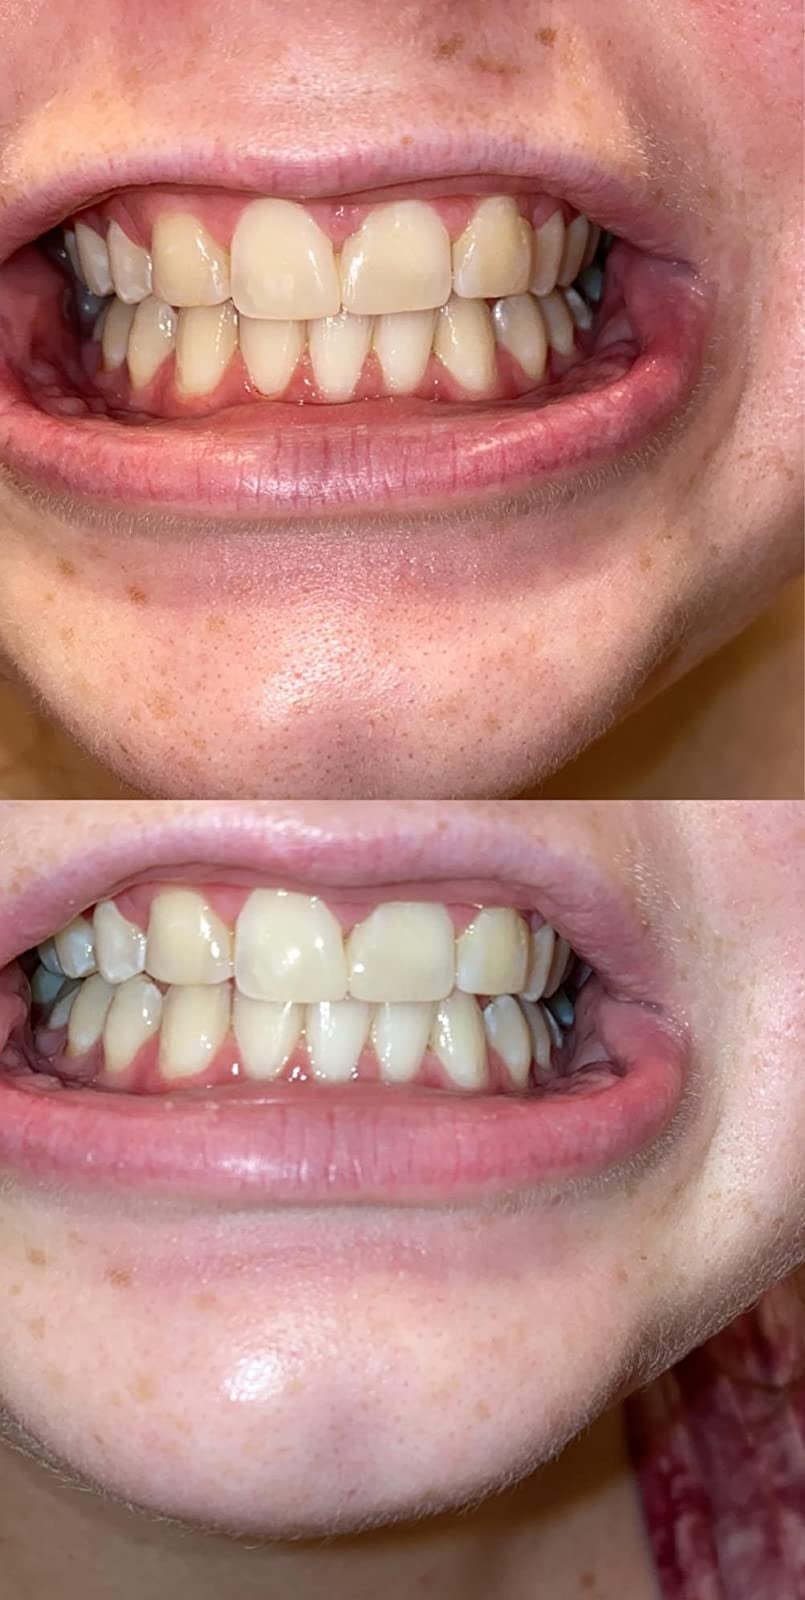 Reviewers teeth before using the product/After results showing whiter teeth